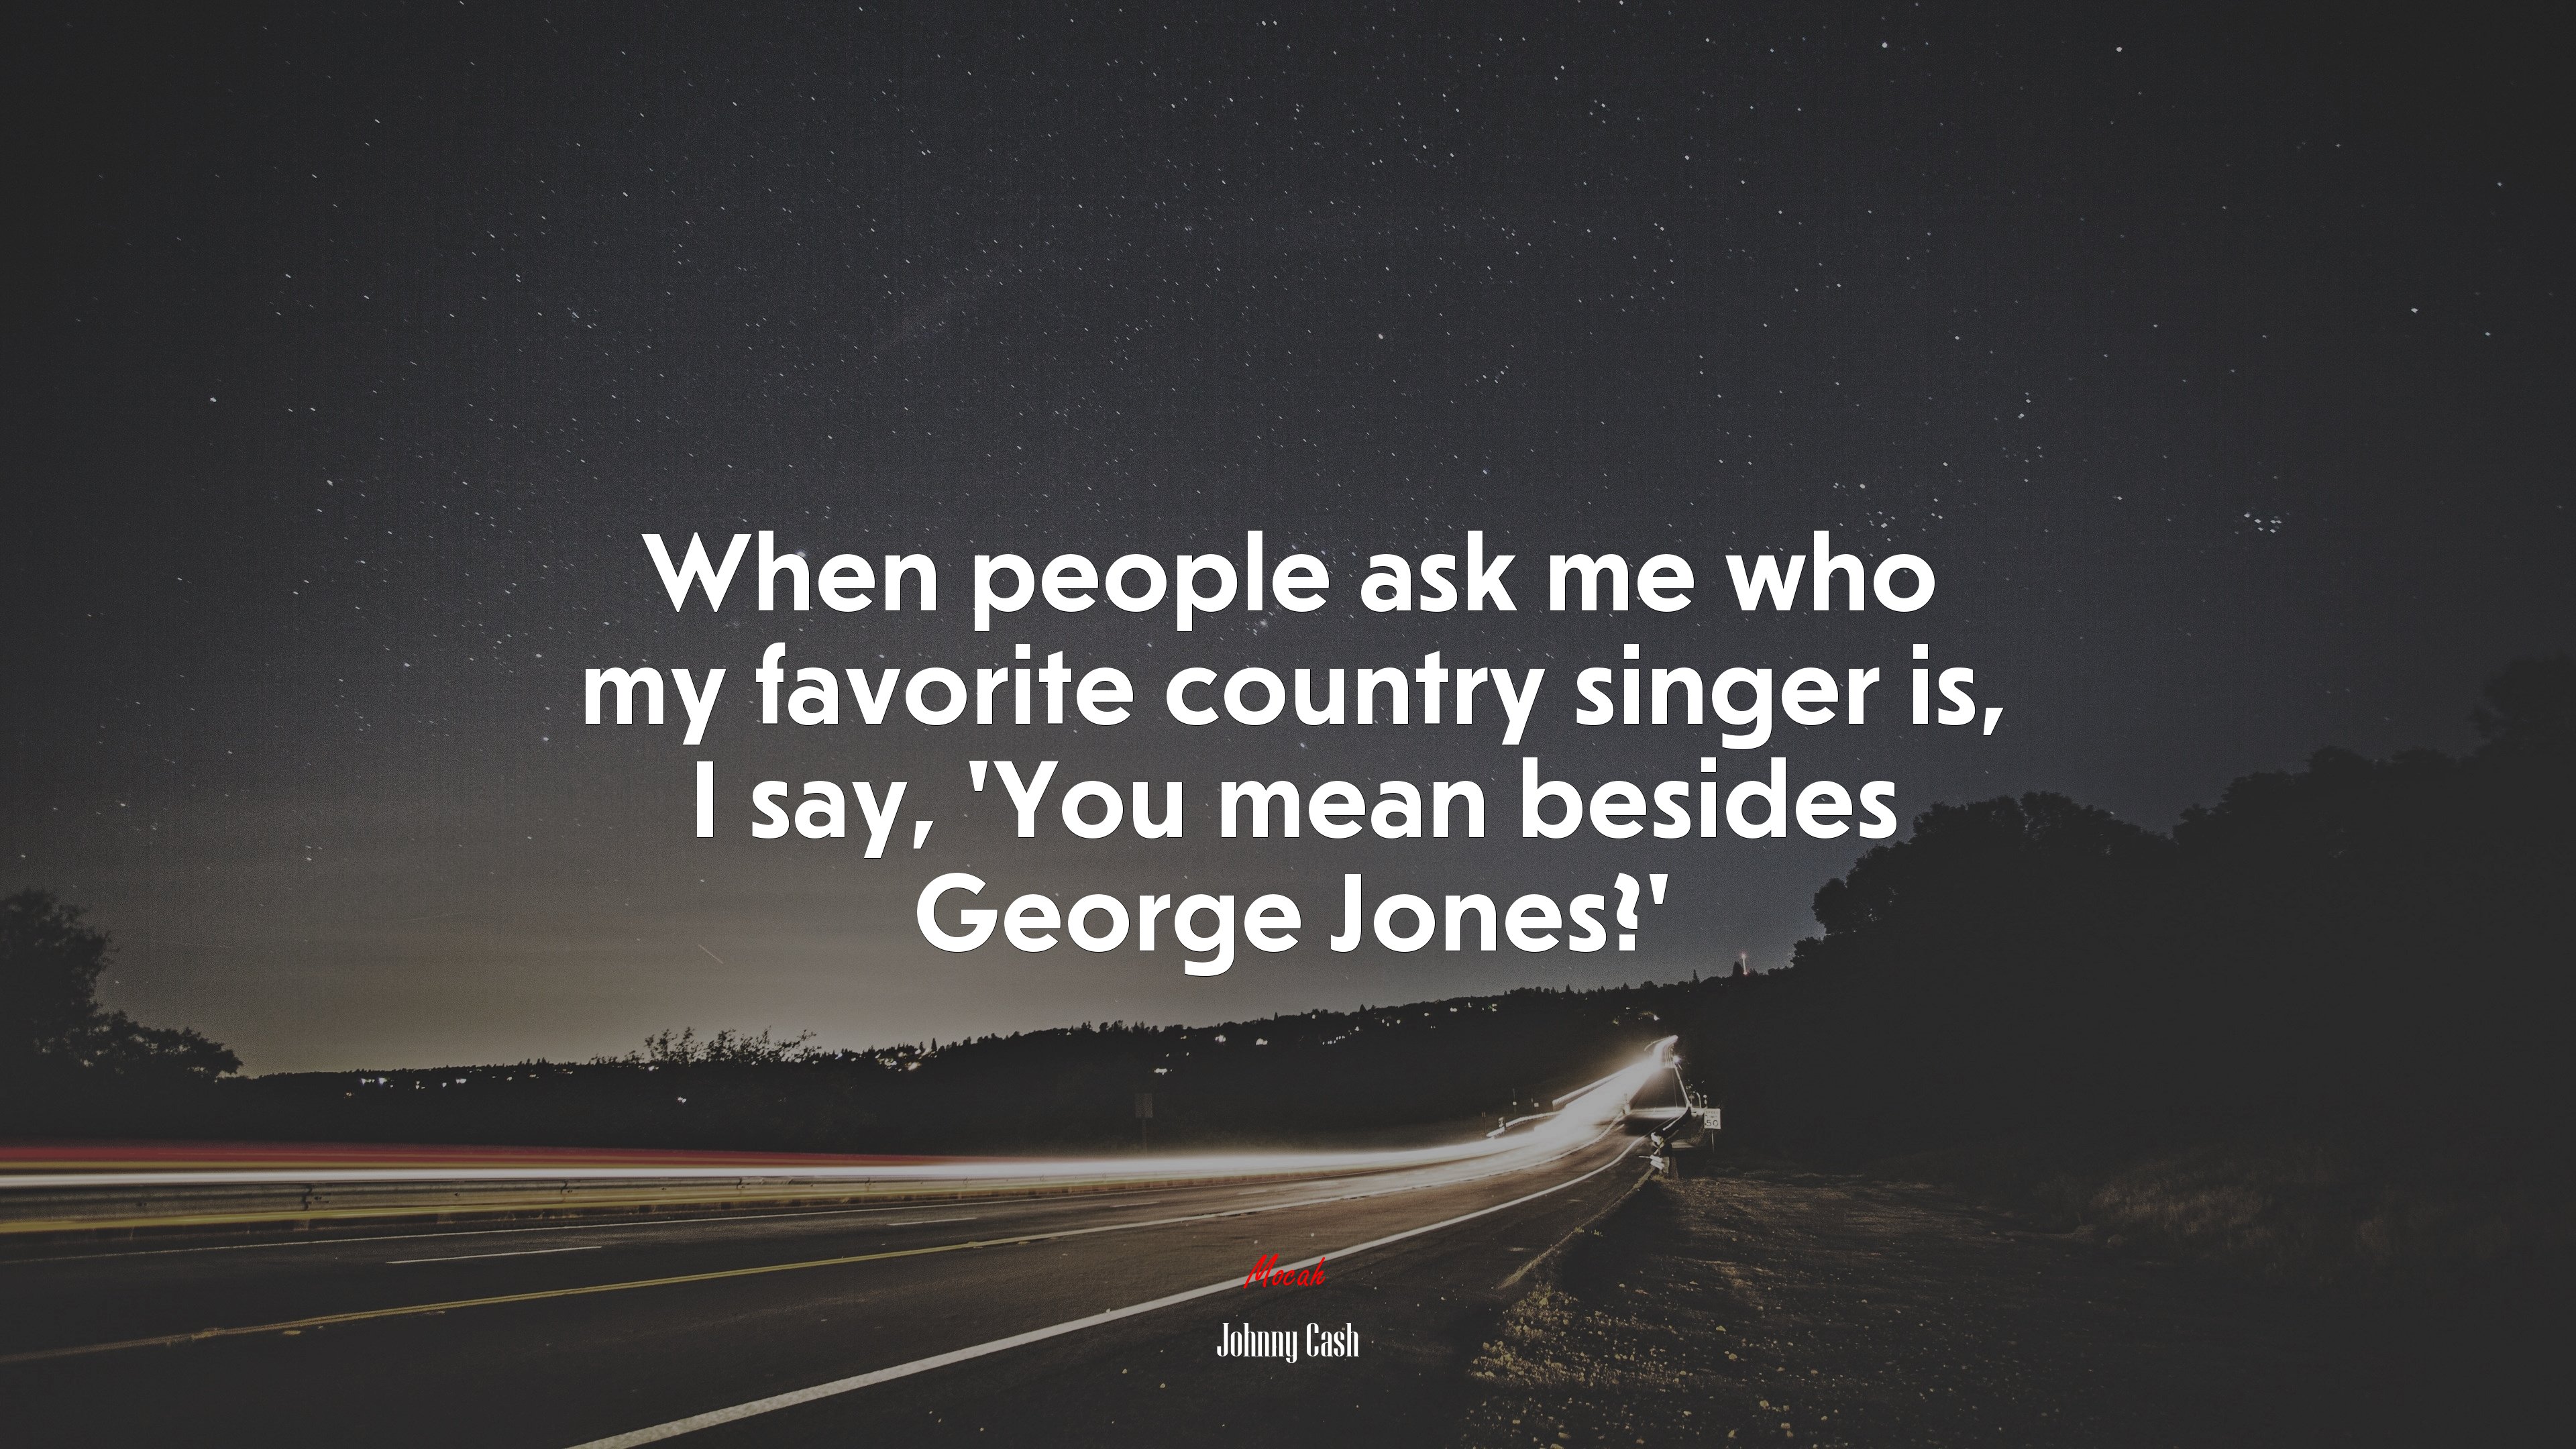 When people ask me who my favorite country singer is, I say, 'You mean besides George Jones?'. Johnny Cash quote, 4k wallpaper. Mocah HD Wallpaper